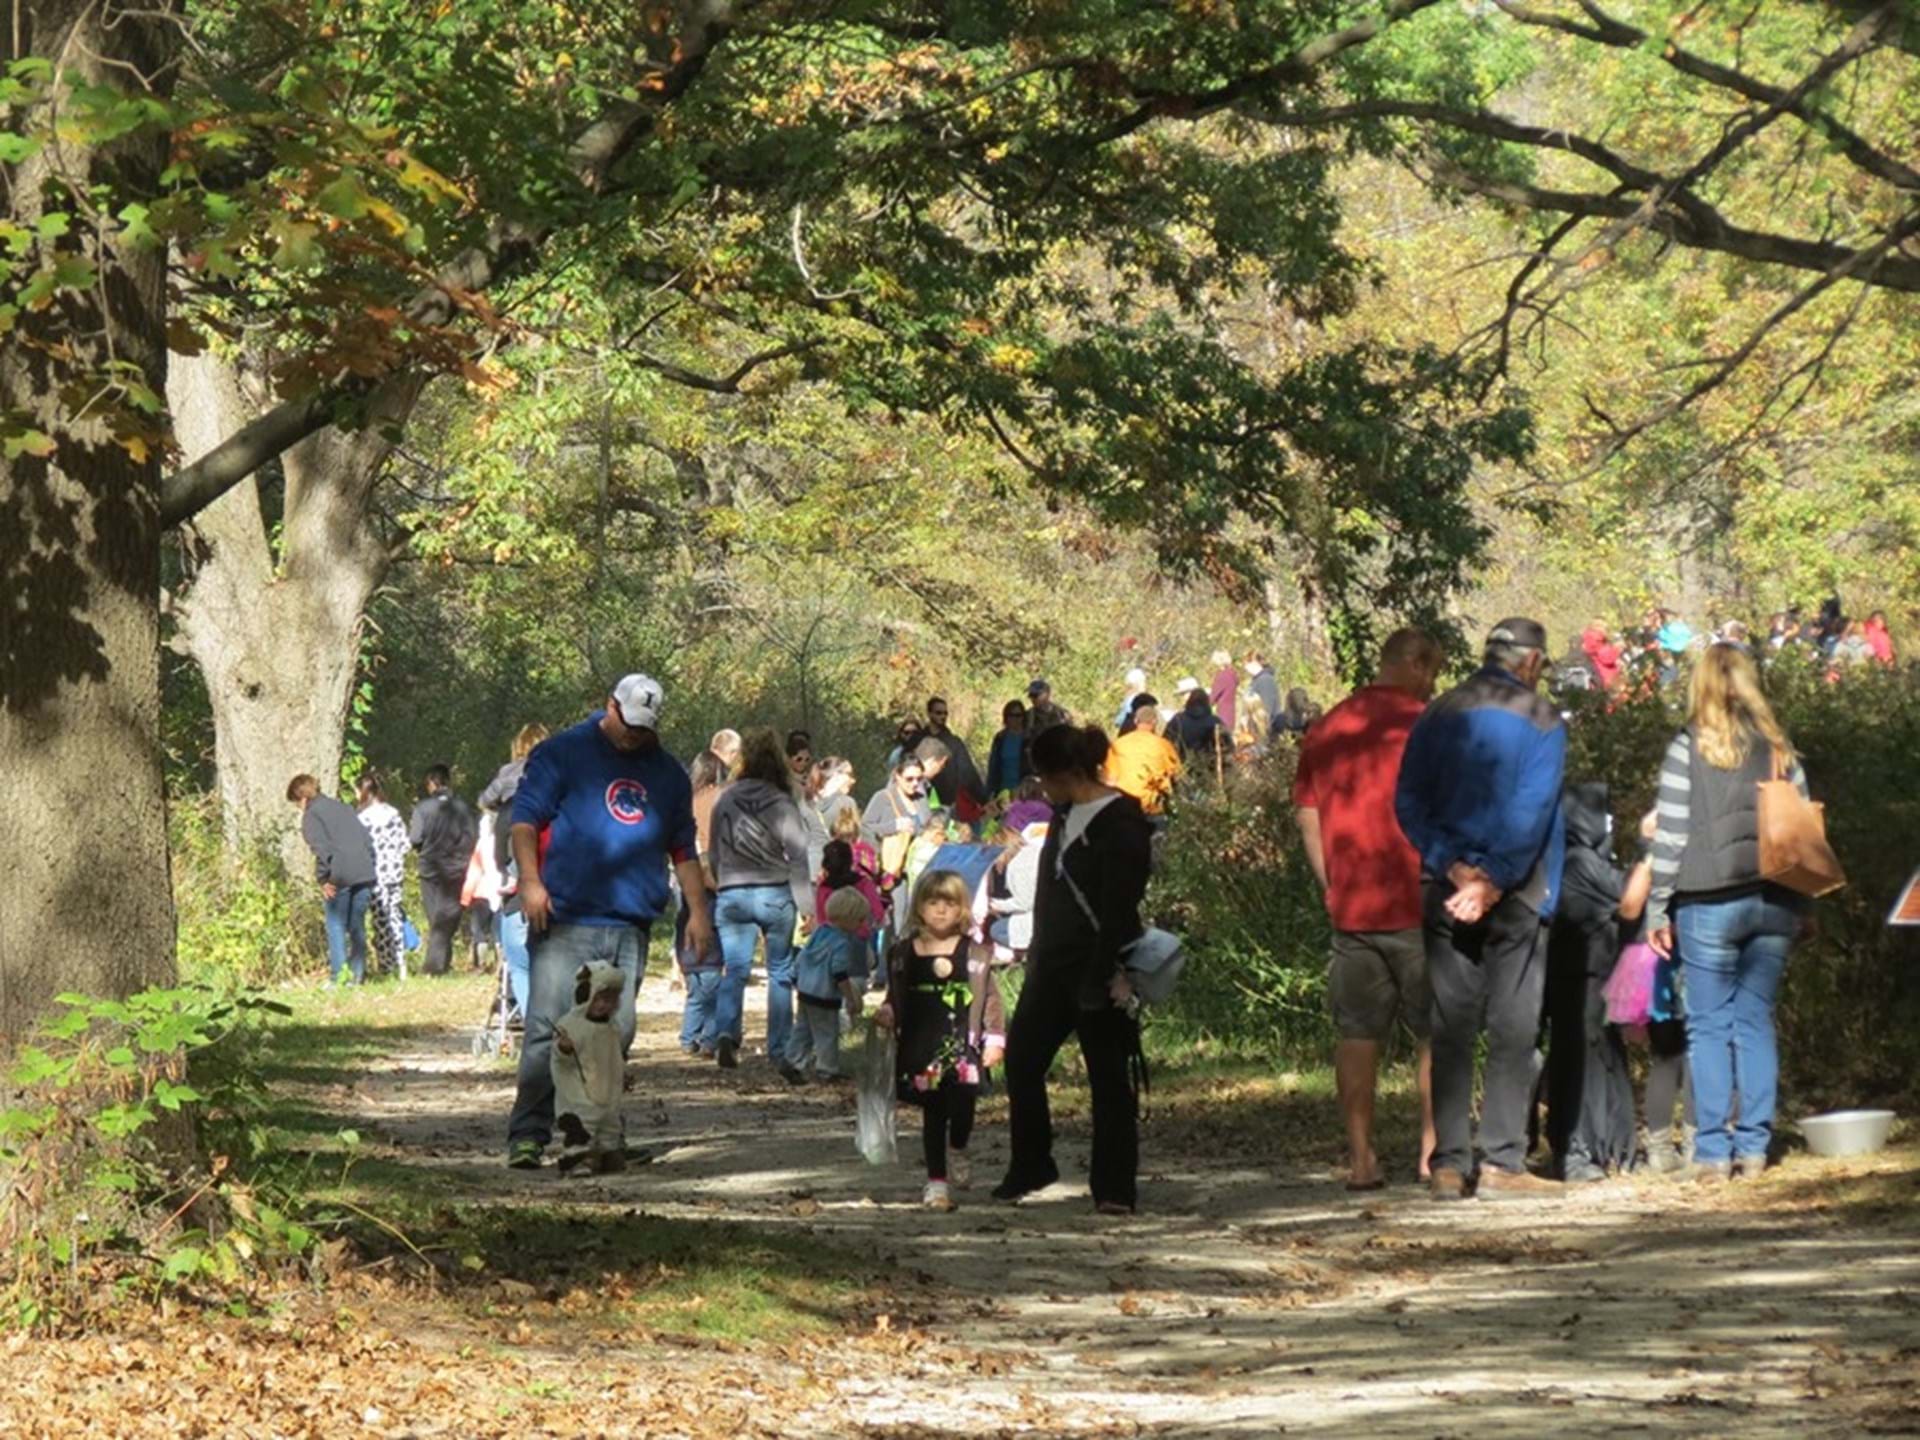 Several programs are held year round to allow all ages to connect with nature